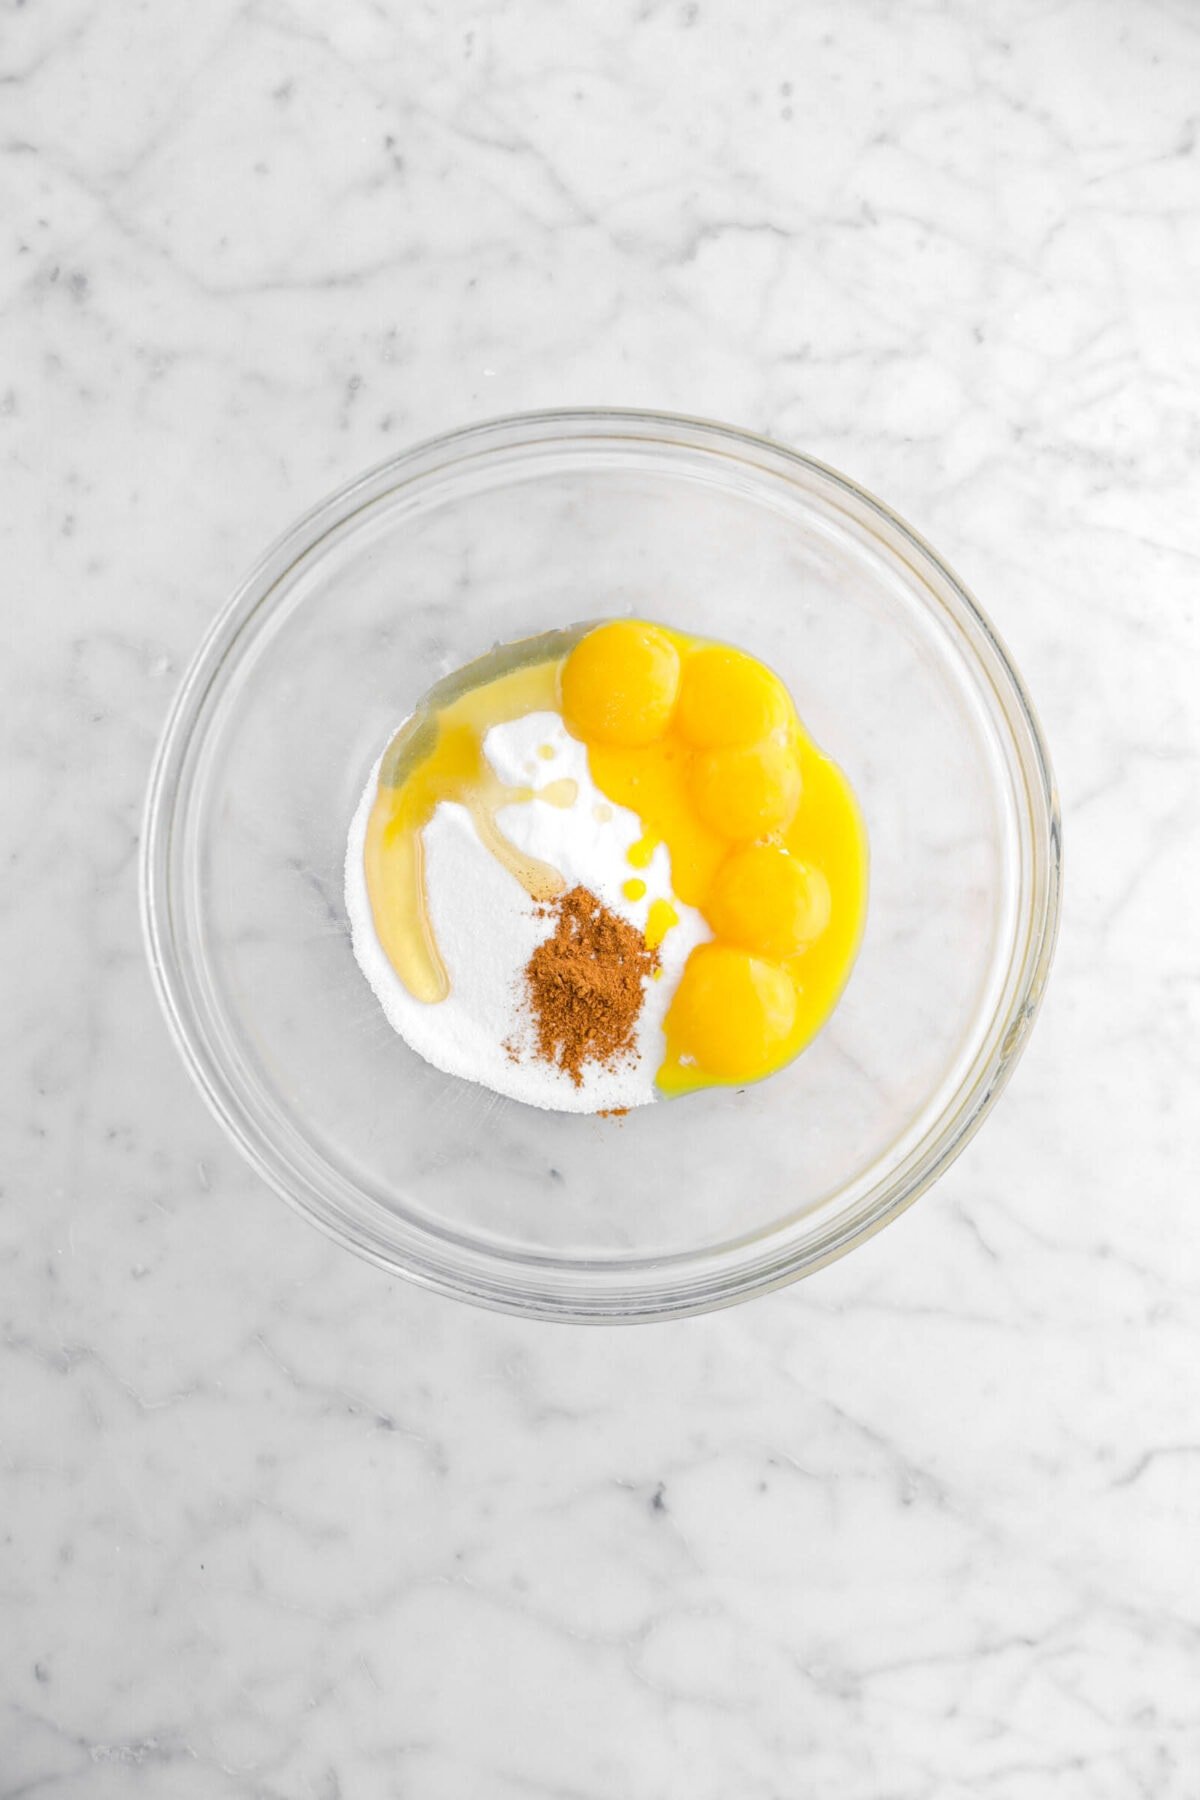 sugar, agave, ground cinnamon, and egg yolks in glass bowl.